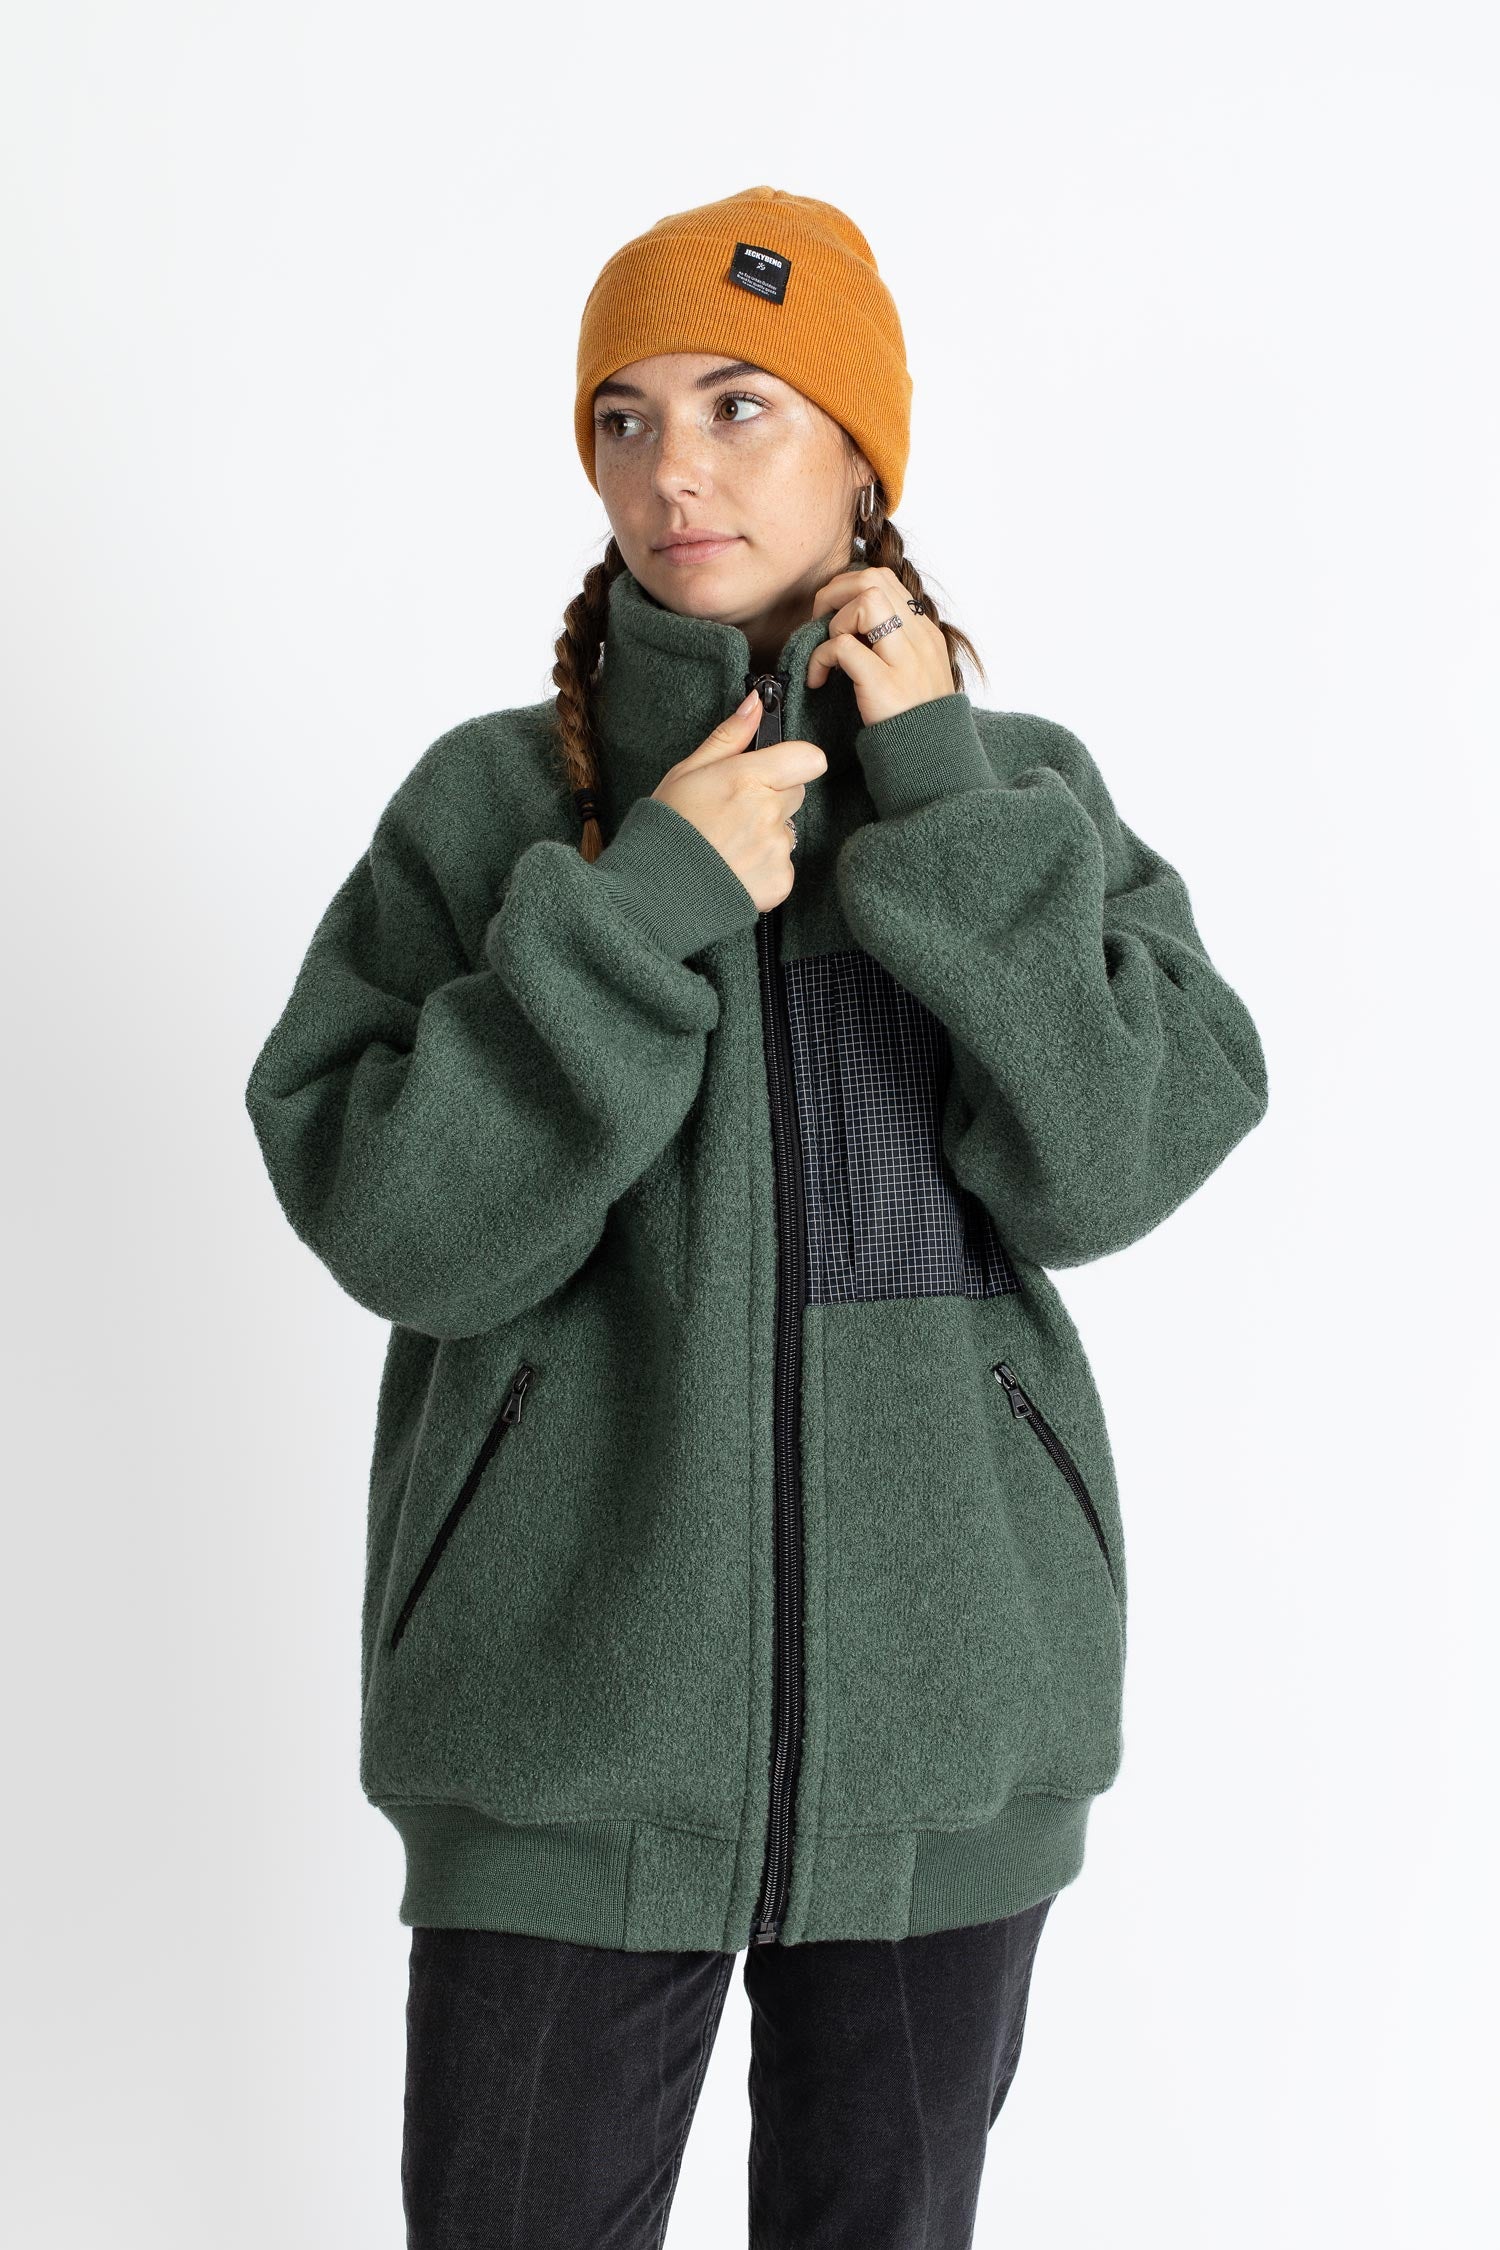 JECKYBENG-The-NATURAL-WOOLFLEECE-JACKET-01-olive-green